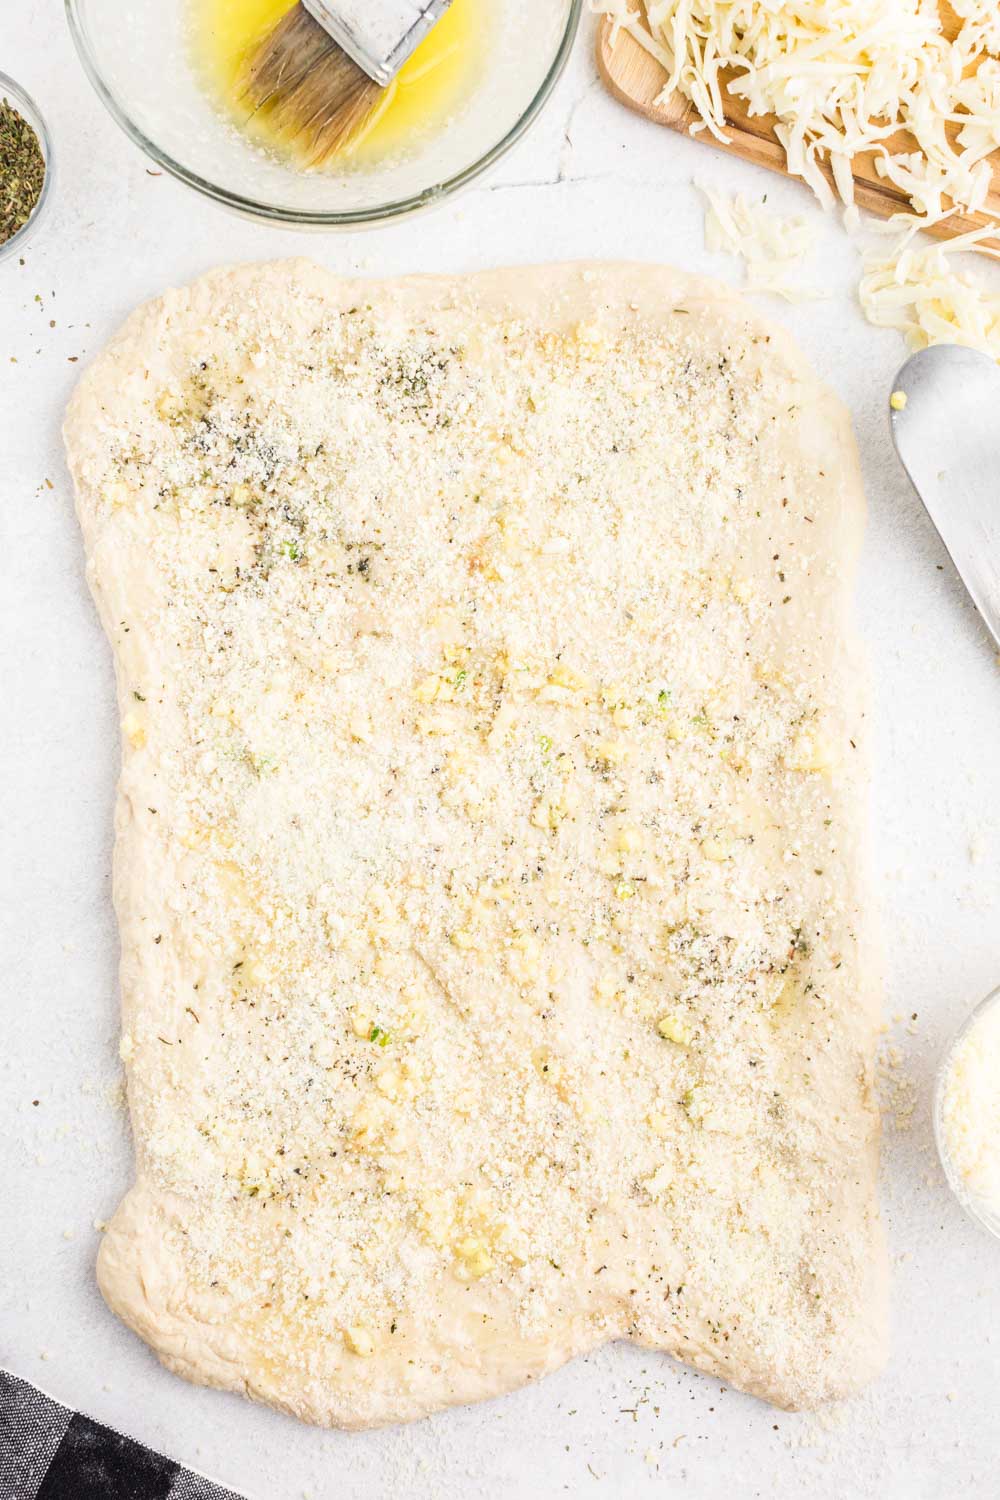 Rolled out bread dough topped with seasoning, minced garlic, melted butter, and grated cheese, on a white marble surface.